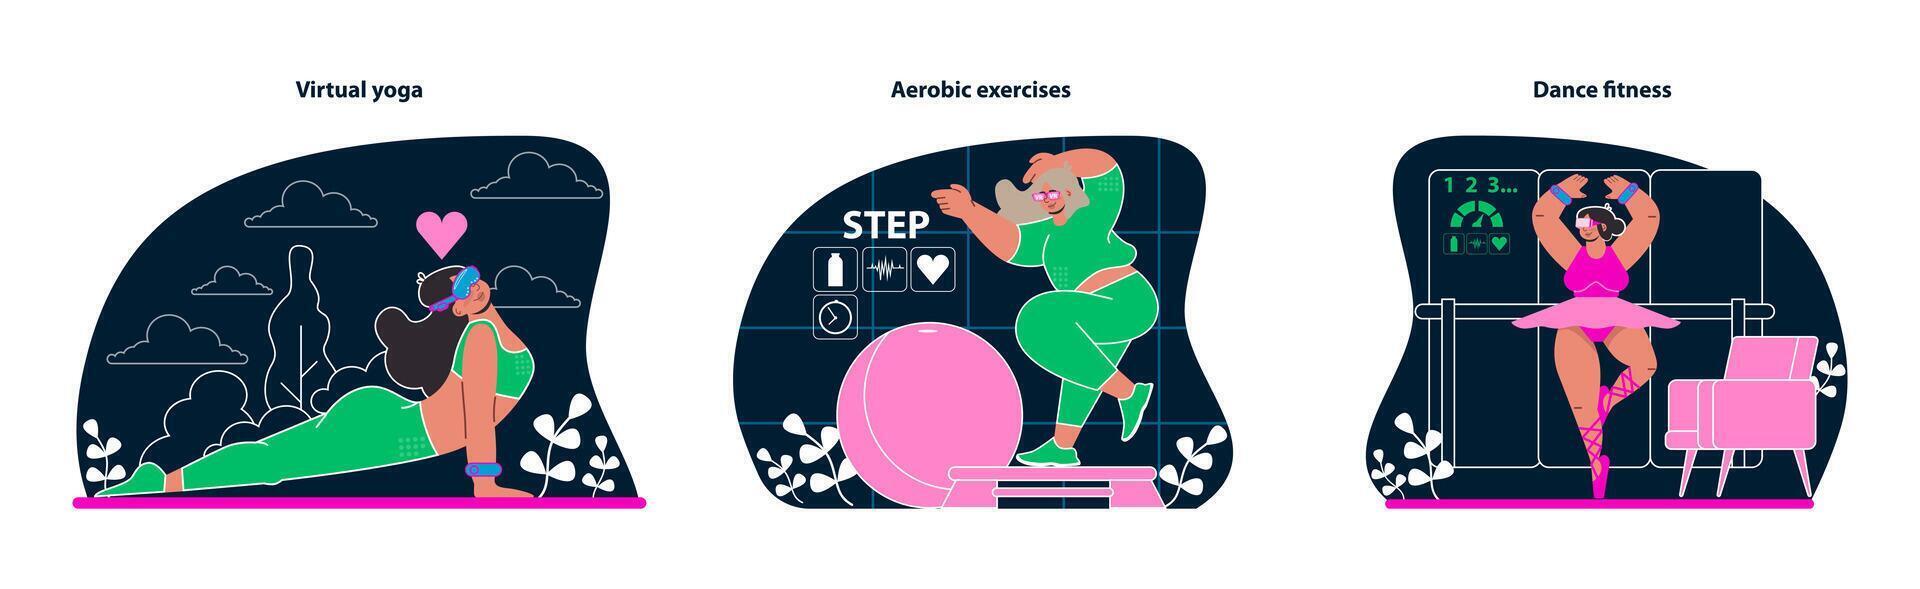 VR Workout collection. Virtual yoga, aerobic steps, and dance routines come to life. vector